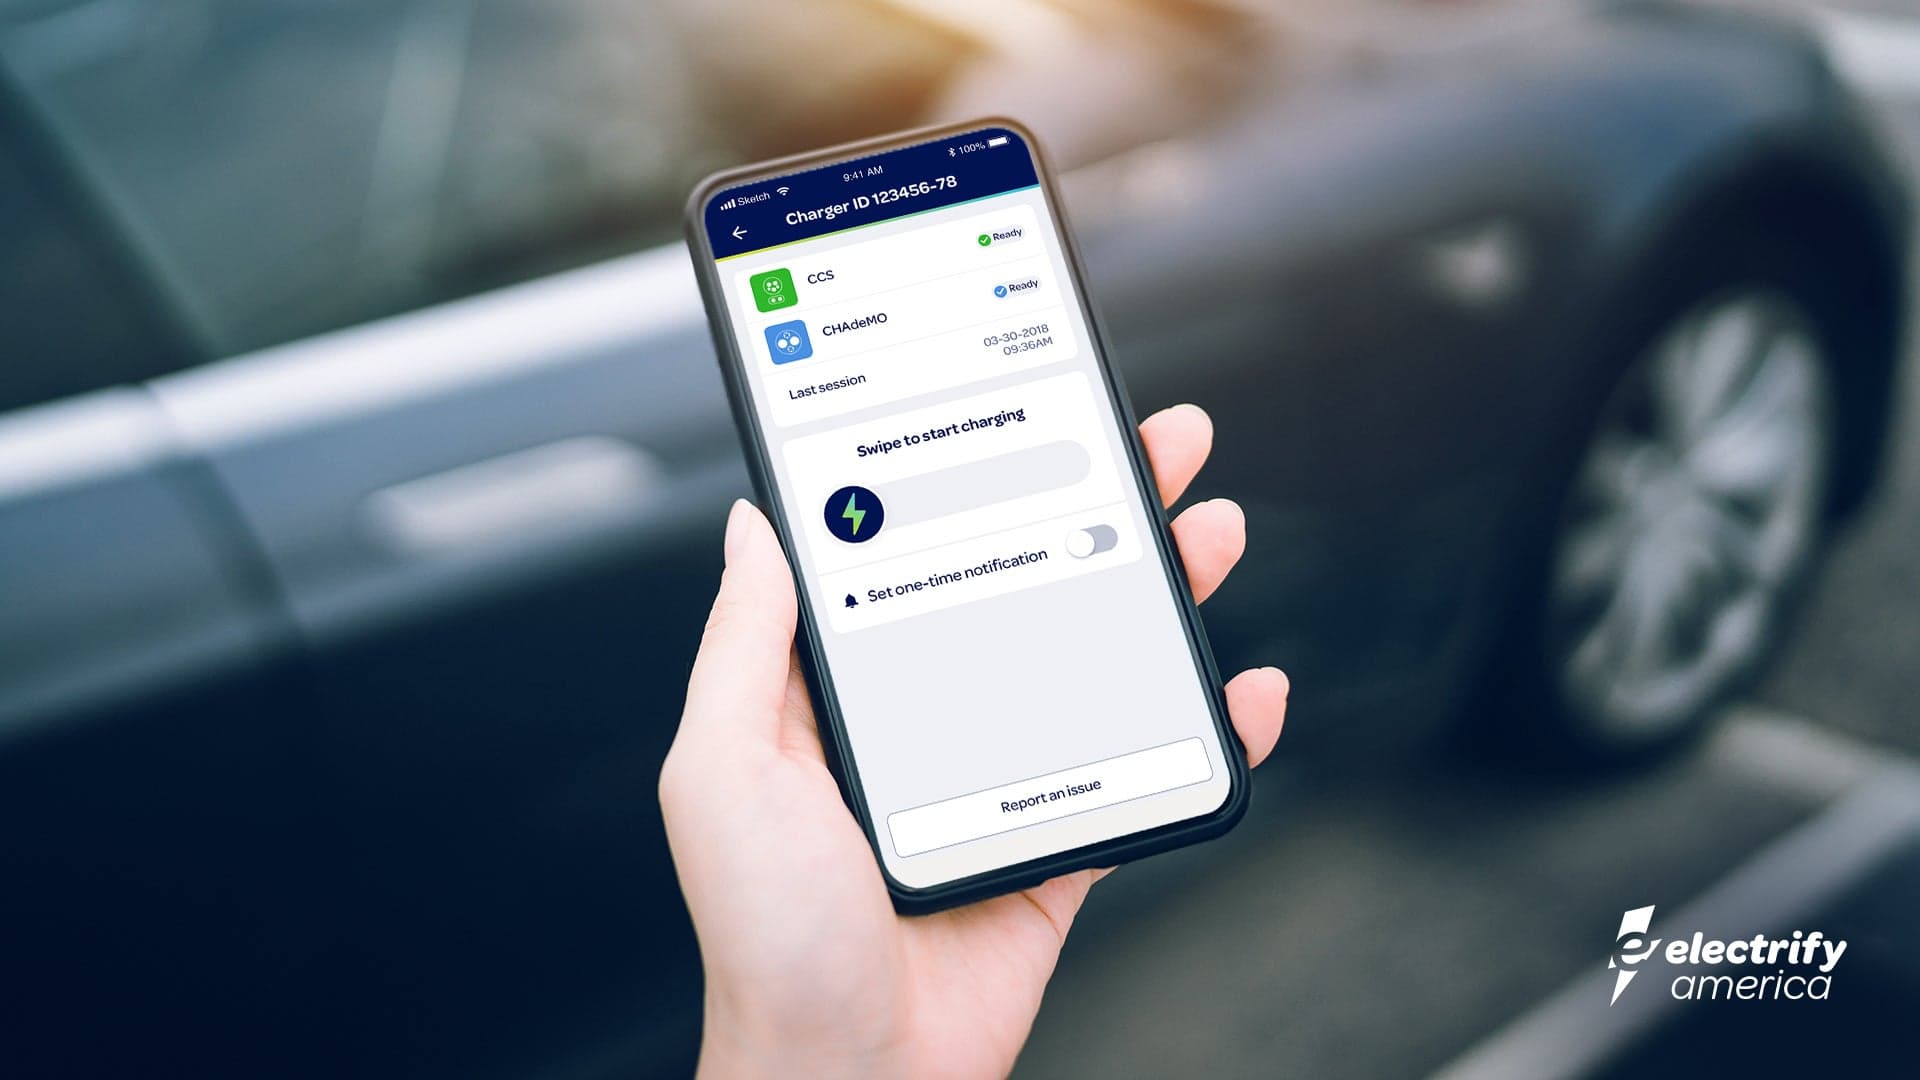 VW’s Electrify America Launches New App to Help EV Drivers Find, Pay for Charging